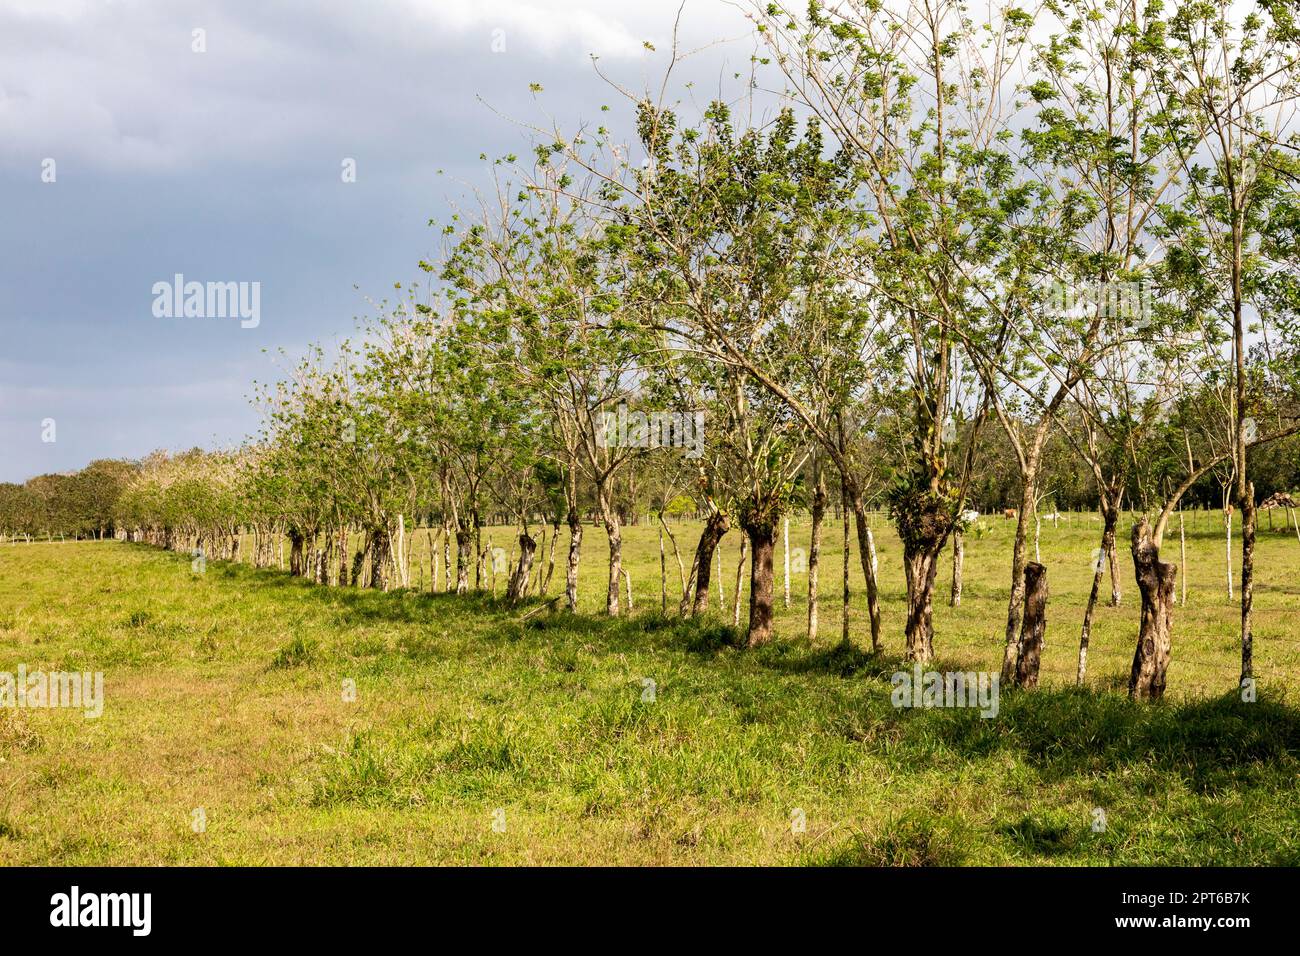 Muelle San Carlos, Costa Rica, Barbed wire strung along a line of trees serves as a fence between cattle pastures Stock Photo